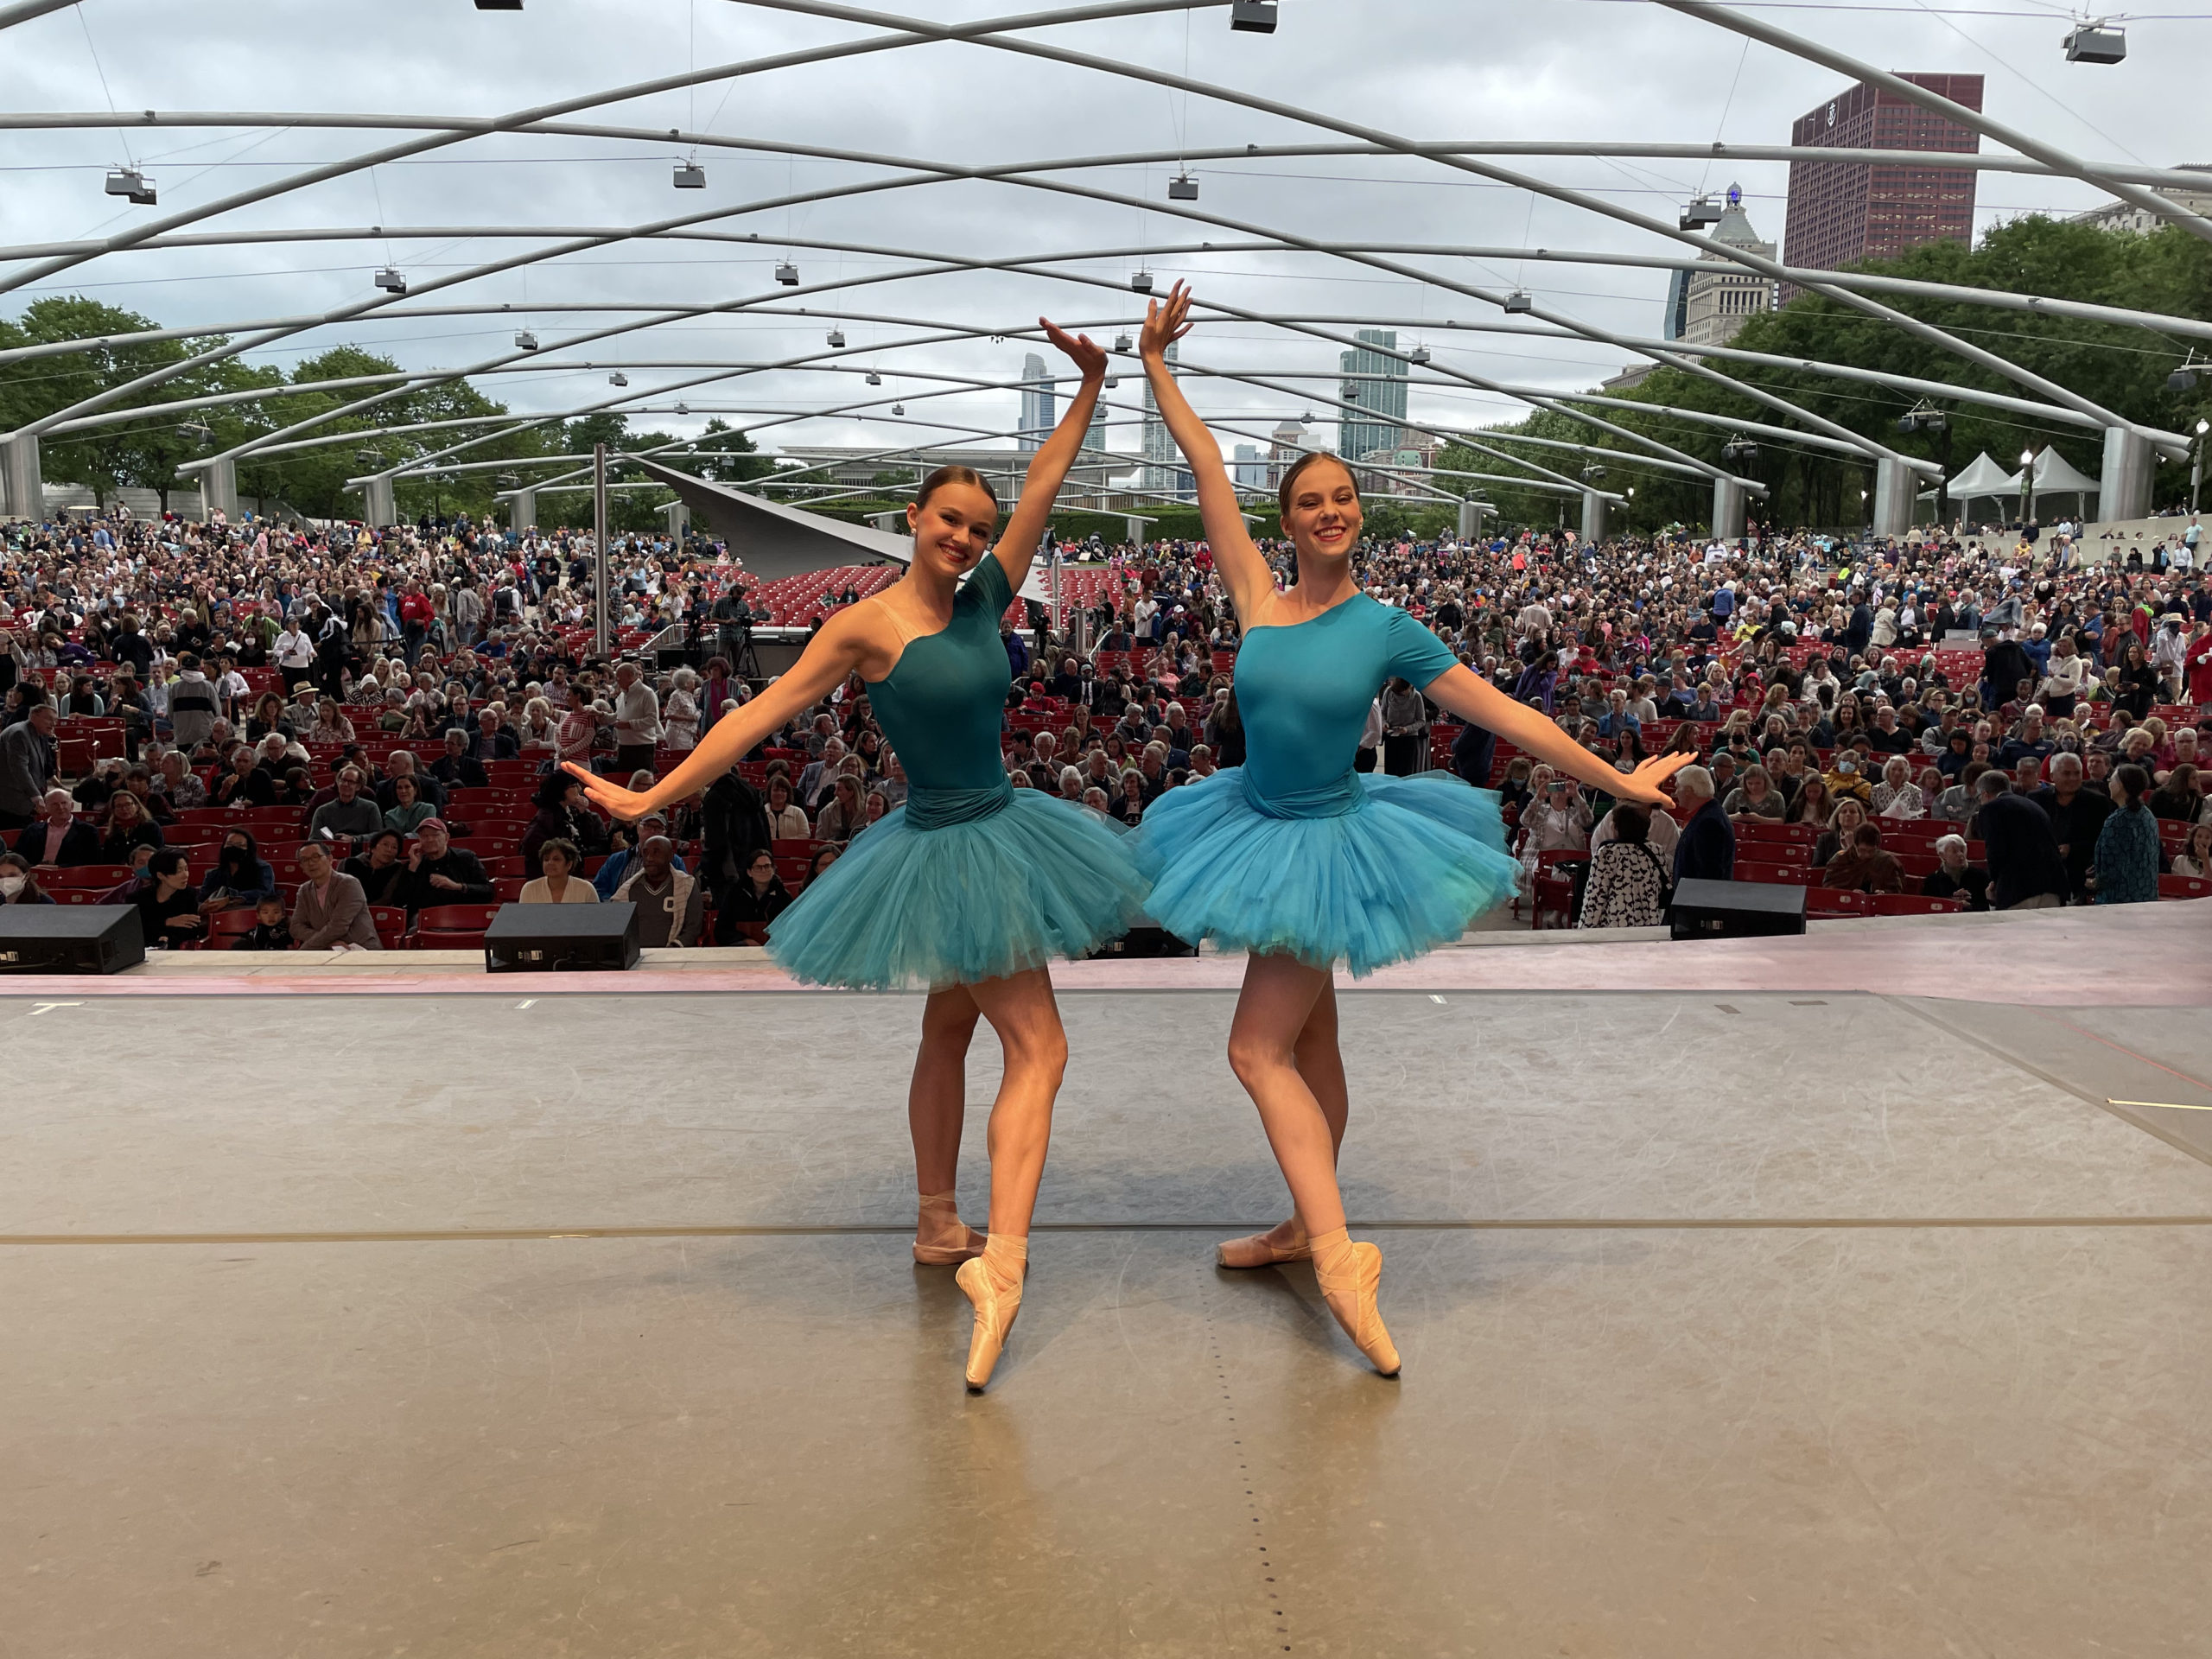 Two female dancers wearing turquoise, one-shouldered tutus, stand opposite each other and bevel their foot on pointe, extending their arms wide with flexed hands. They stand on an outdoor onstage, with a milling audience behind them.